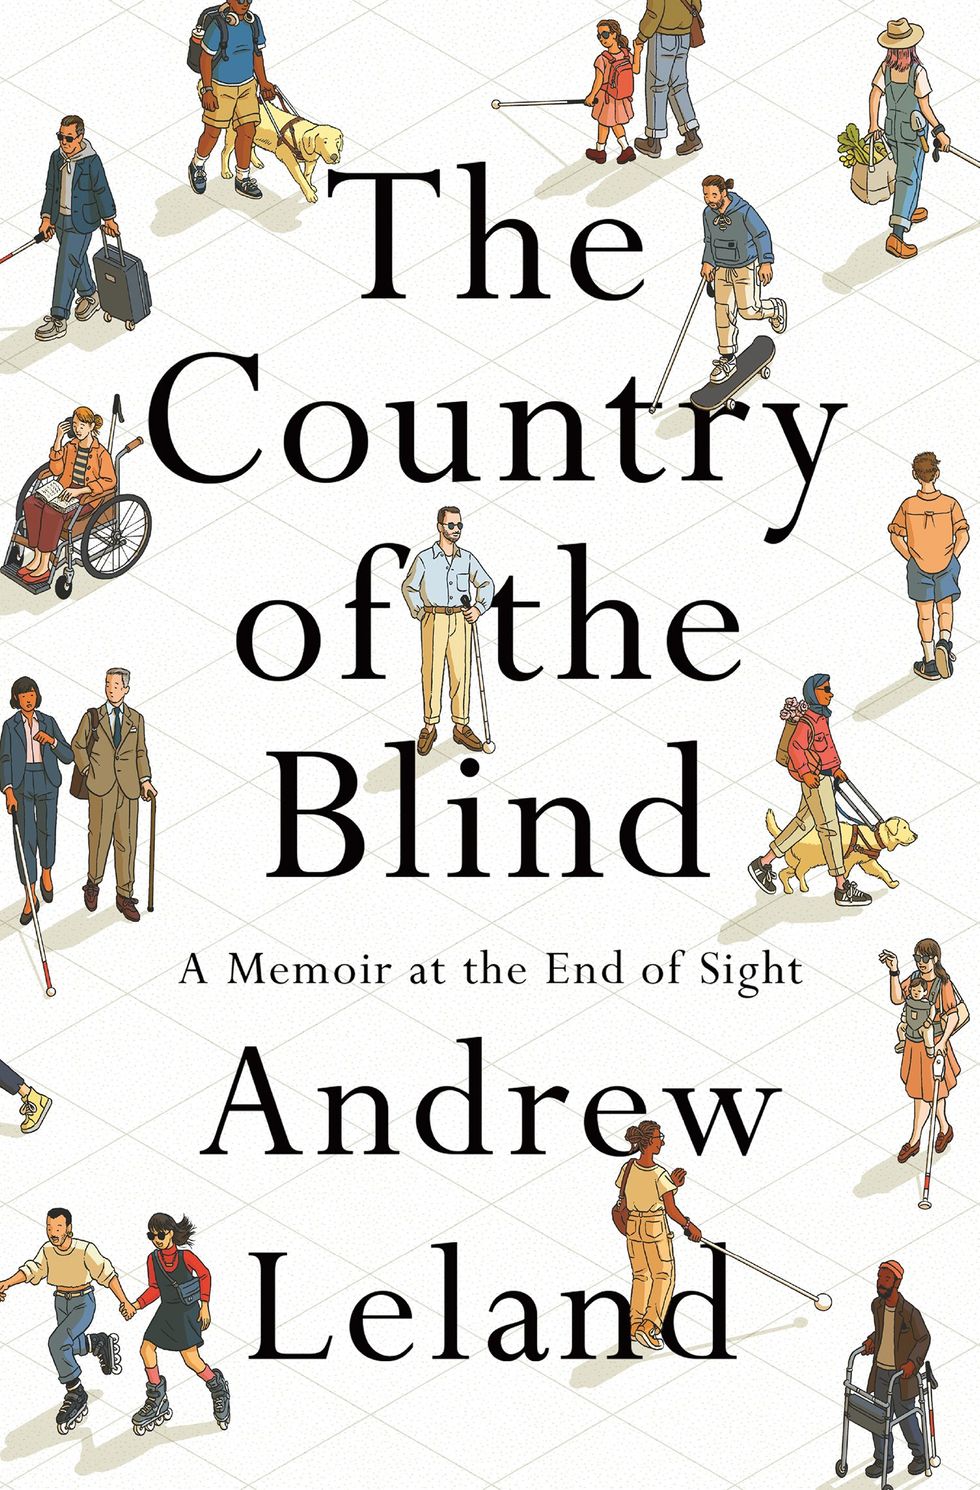 A book cover shows illustrations of sightless individuals in different action poses. The text reads The Country of the Blind, A Memoir at the End of Sight, Andrew Leland.